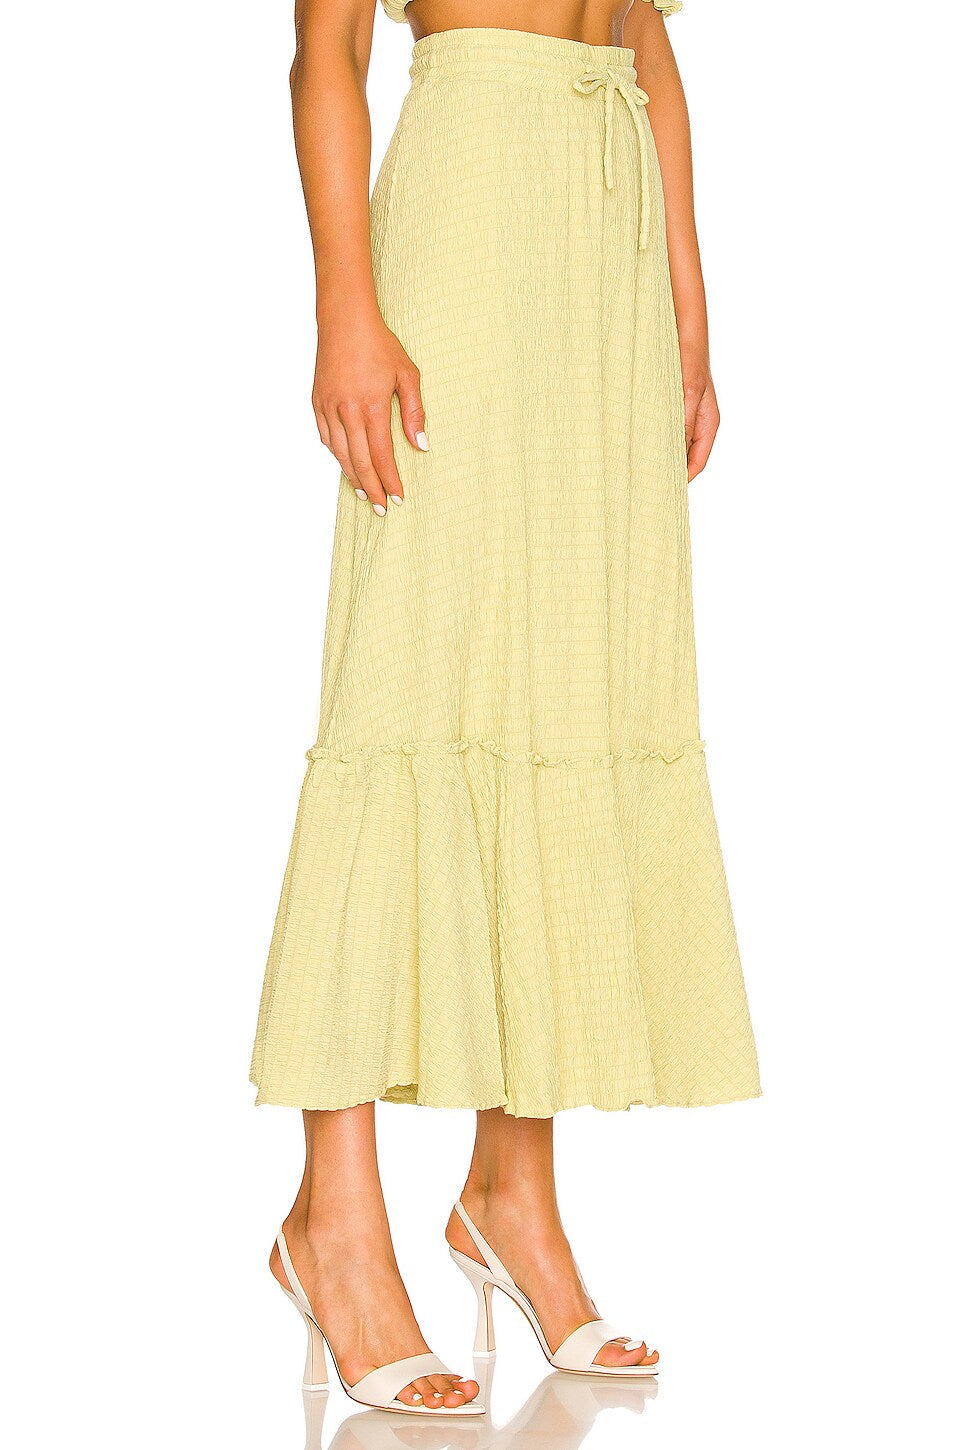 Charlie Skirt in Citrus Green – LPA (a Revolve Group company)